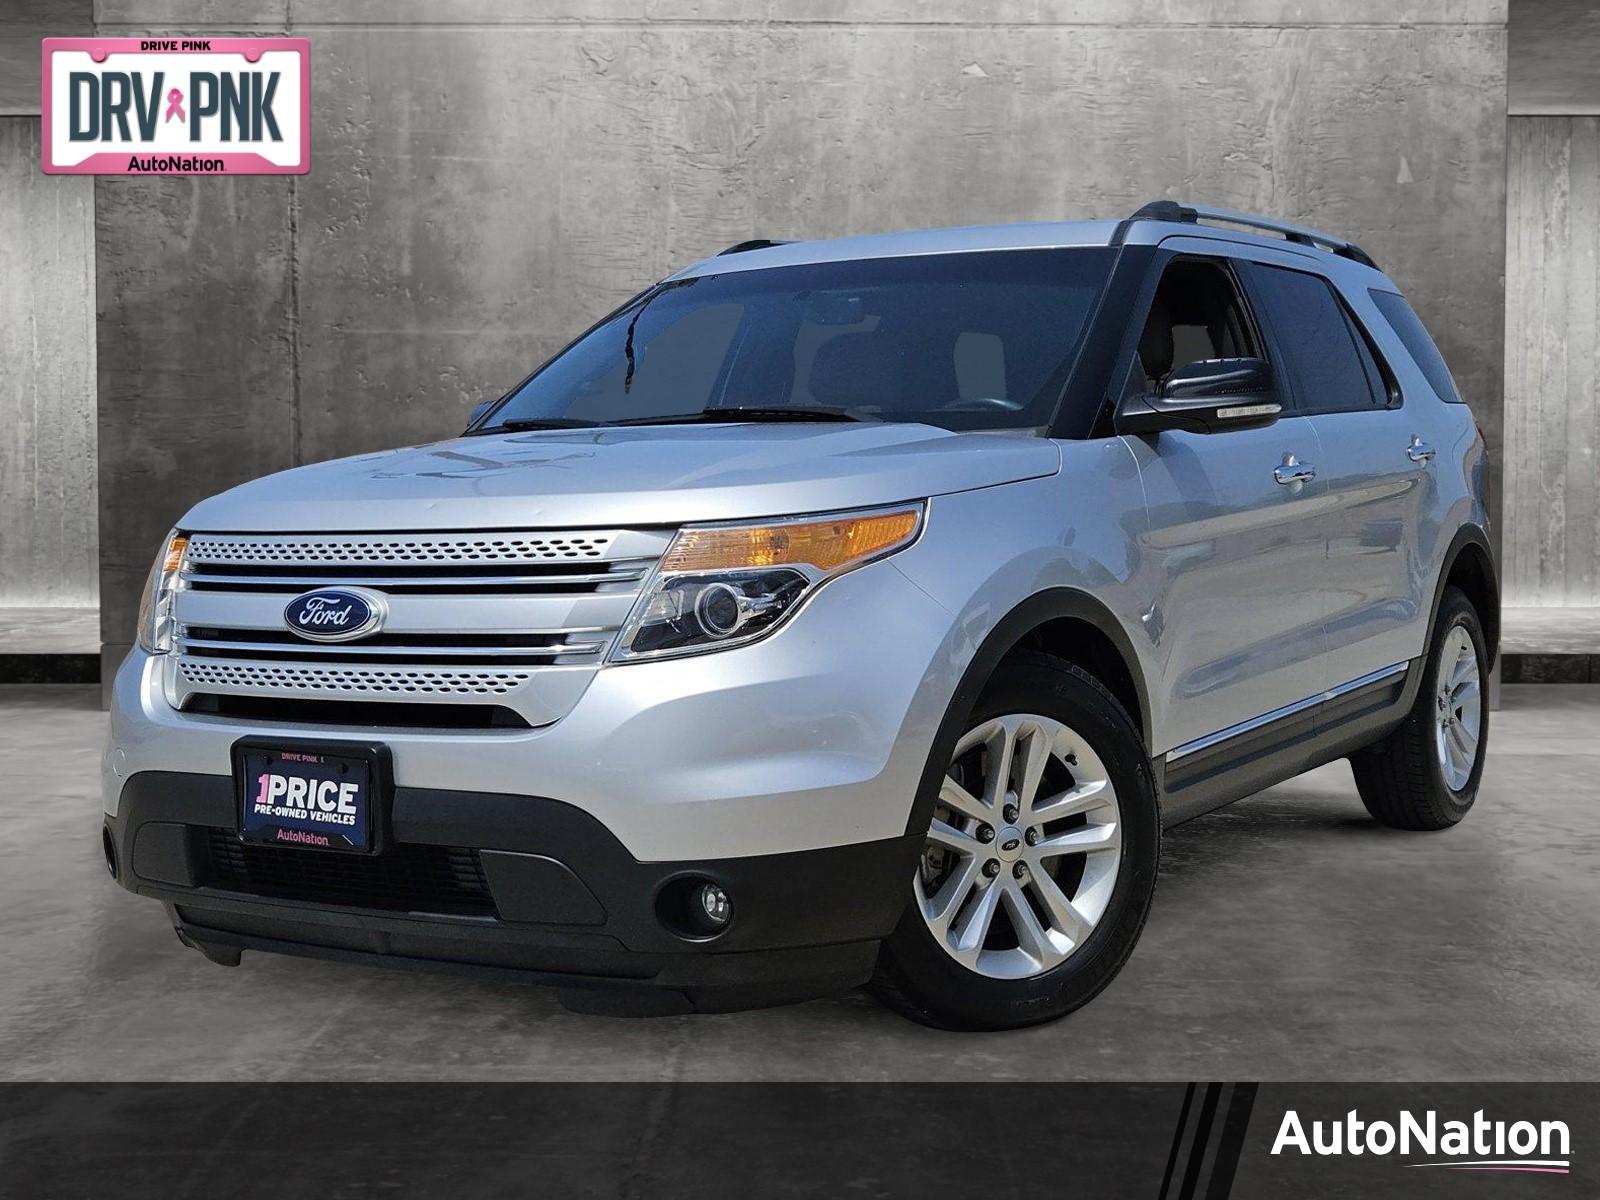 2014 Ford Explorer Vehicle Photo in NORTH RICHLAND HILLS, TX 76180-7199